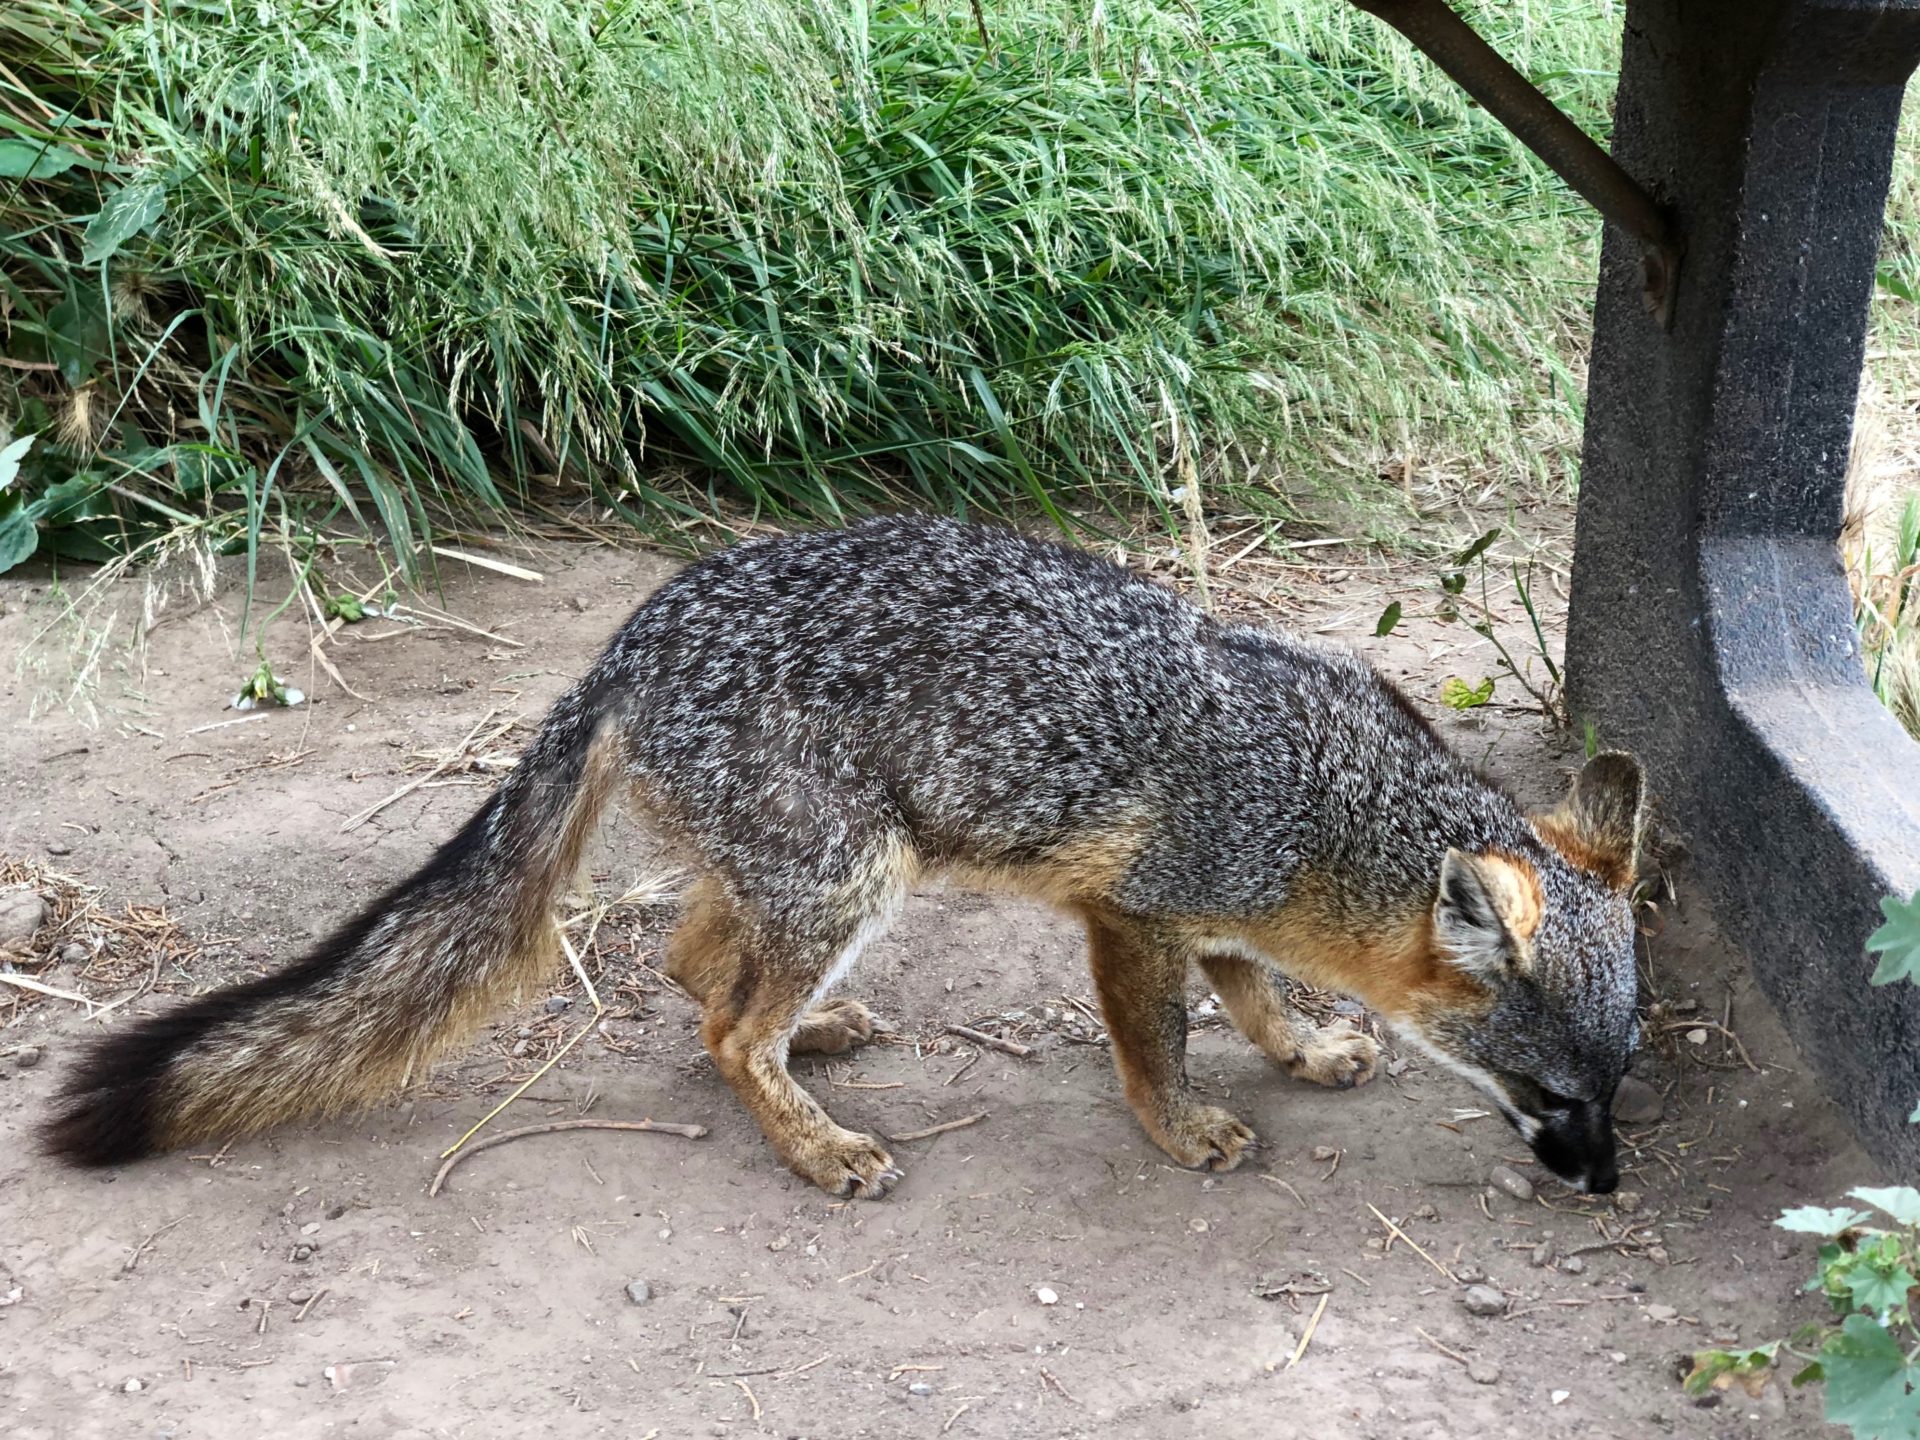 Channel Island fox scavenging for food